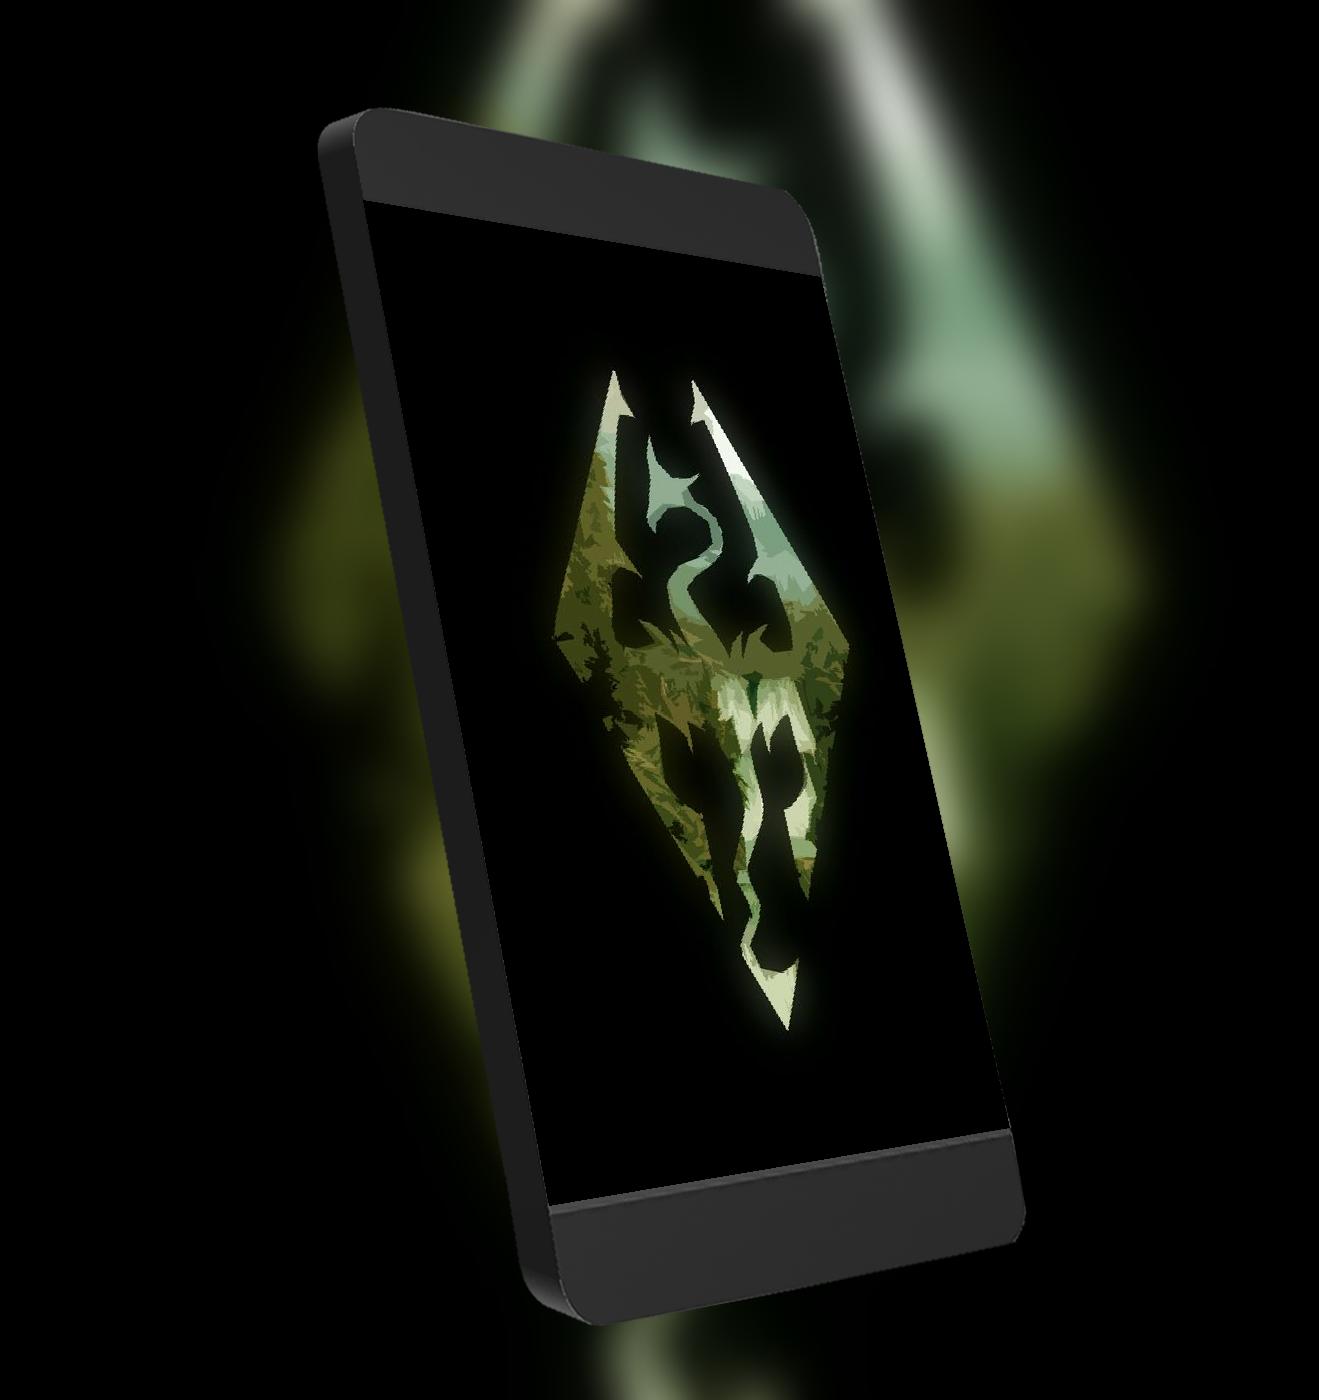 Skyrim Wallpaper For Android Apk Download